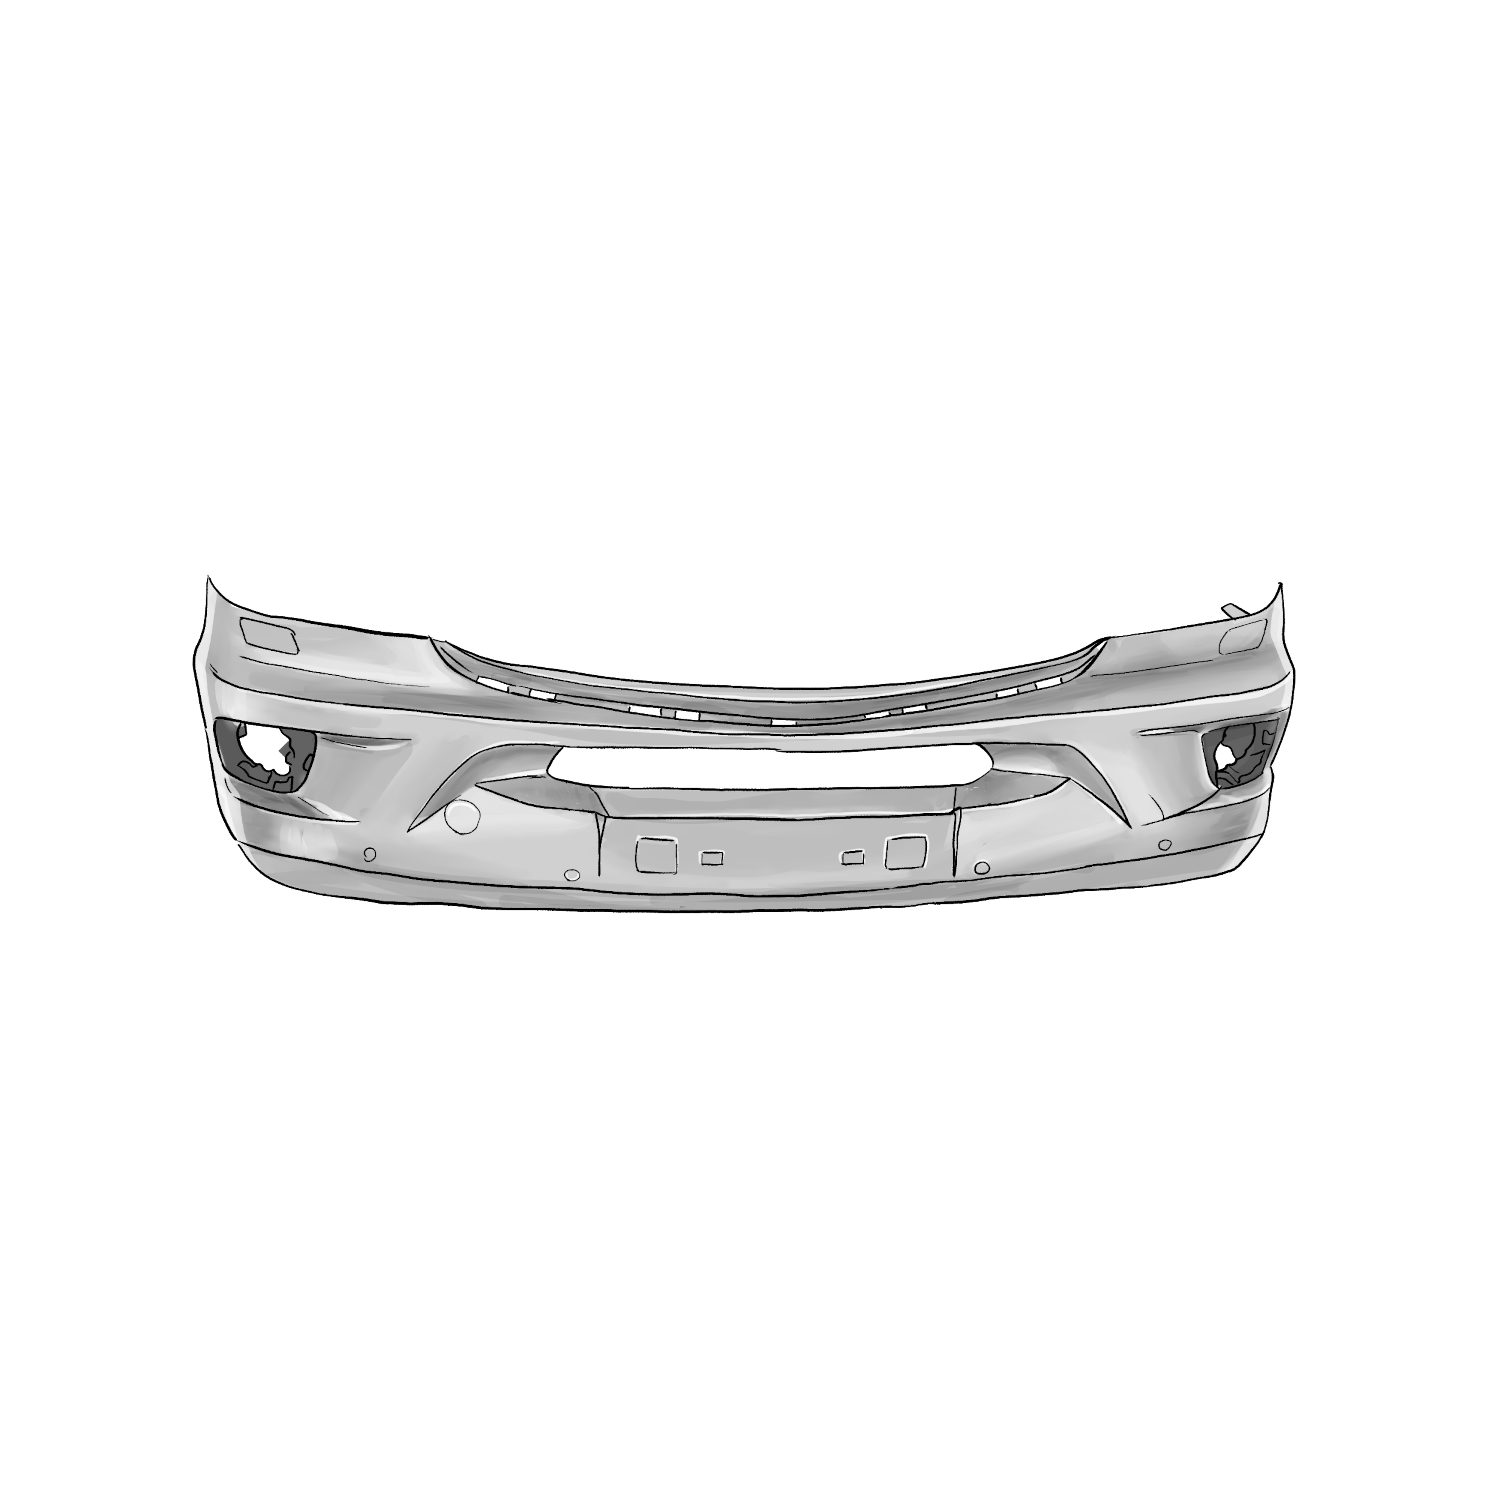  Product image 1 of the product “Bumper OX7 ”